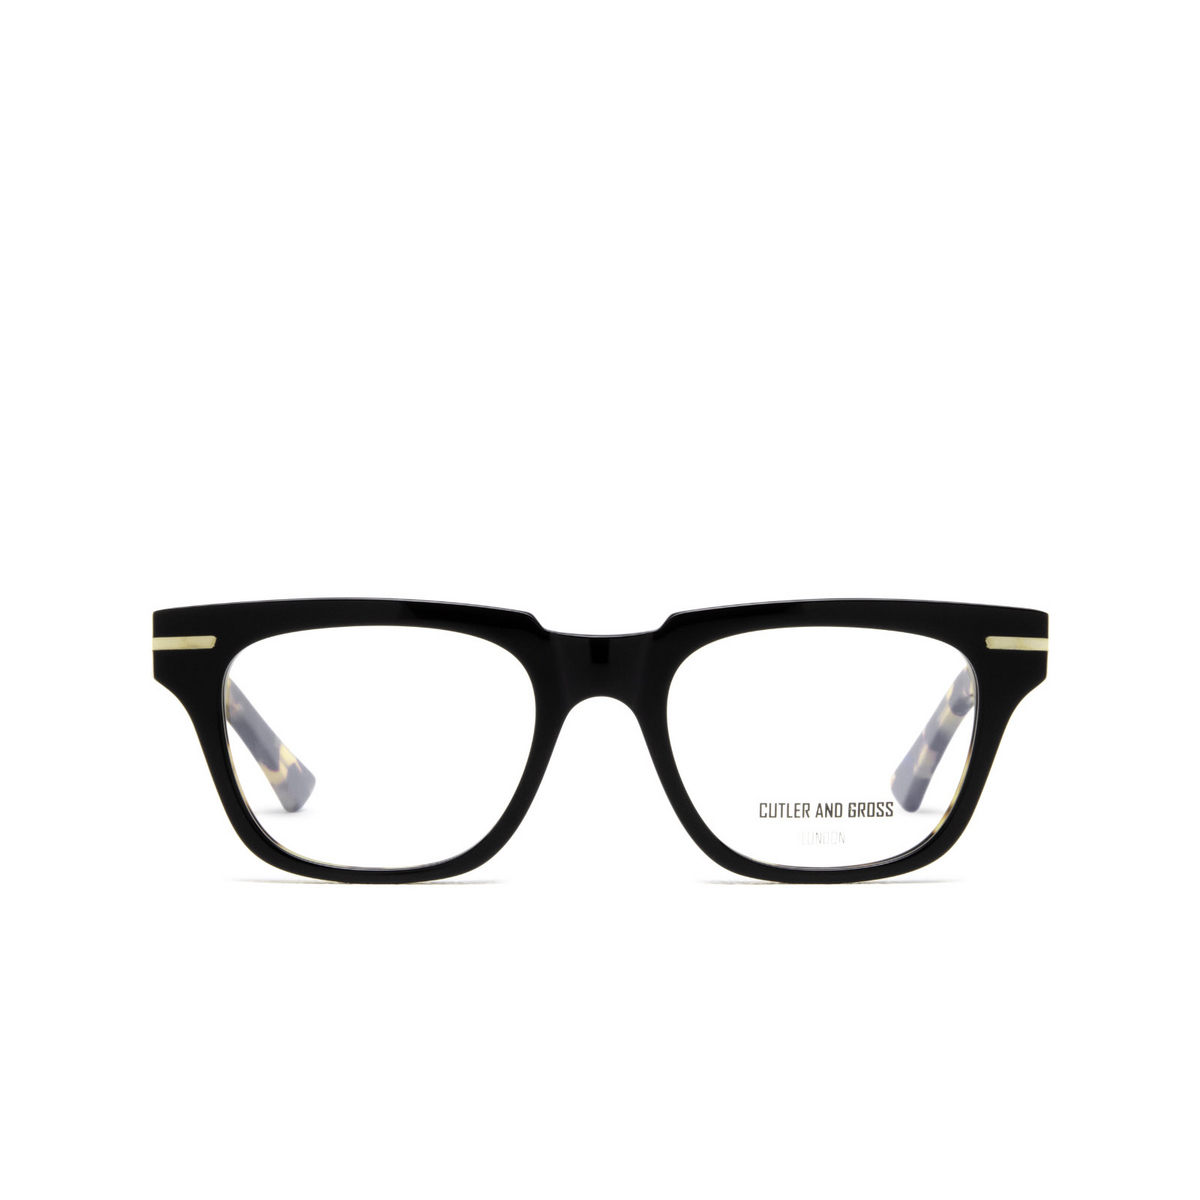 Cutler and Gross 1355 Eyeglasses 04 Black Taxi on Camo - 1/4